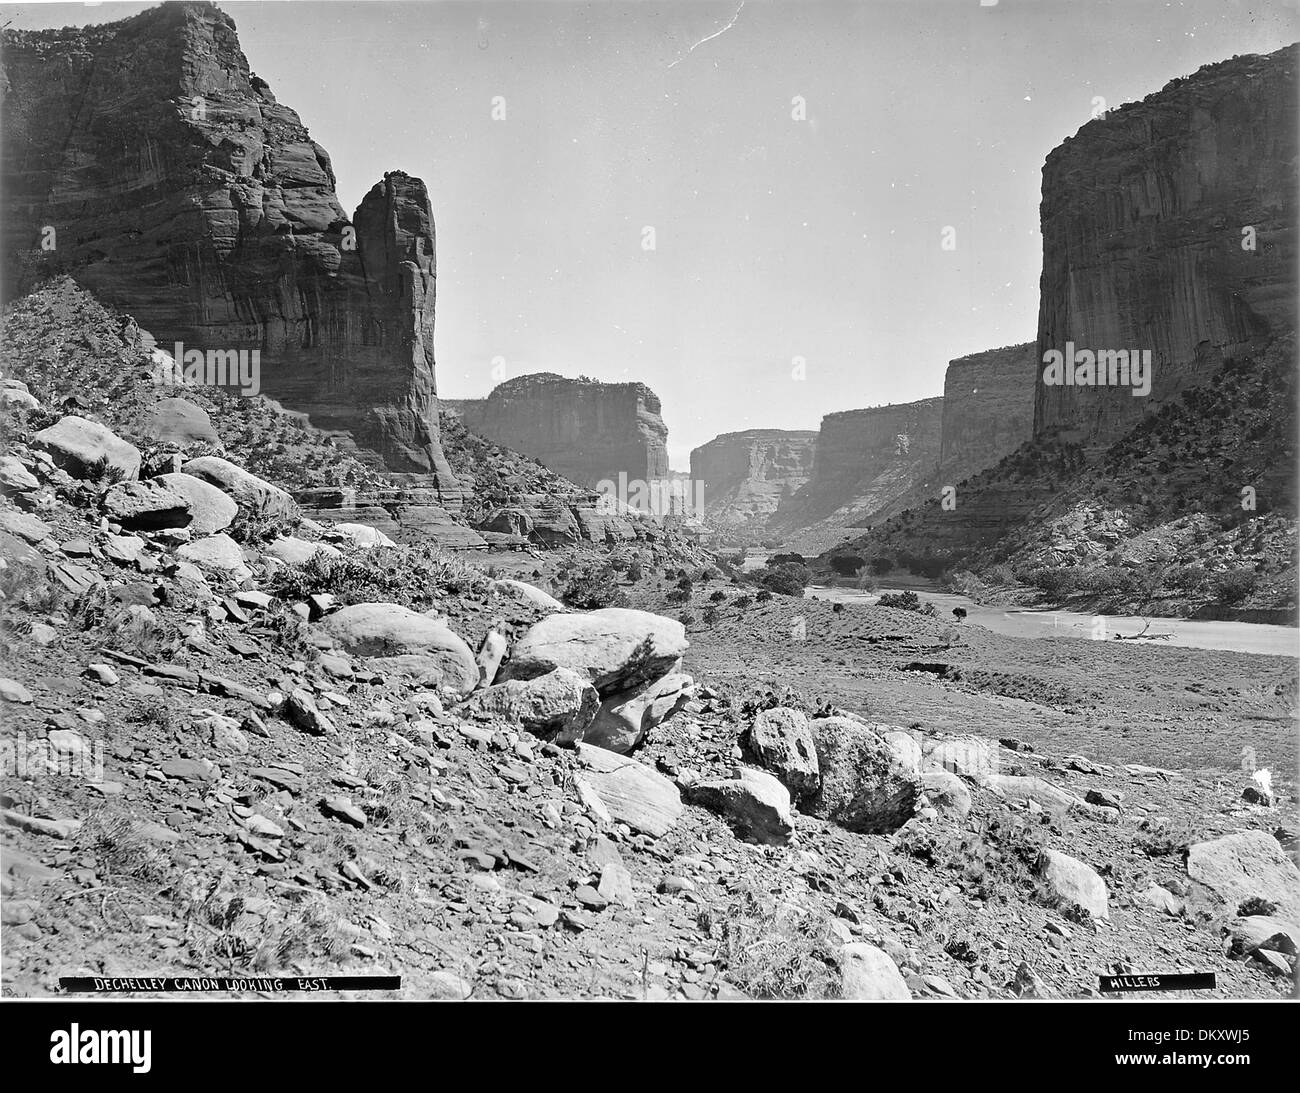 (Old No. 120) De Chelly Canyon, looking east, Arizona. Hillers photo., 1871 - 1878 517768 Stock Photo